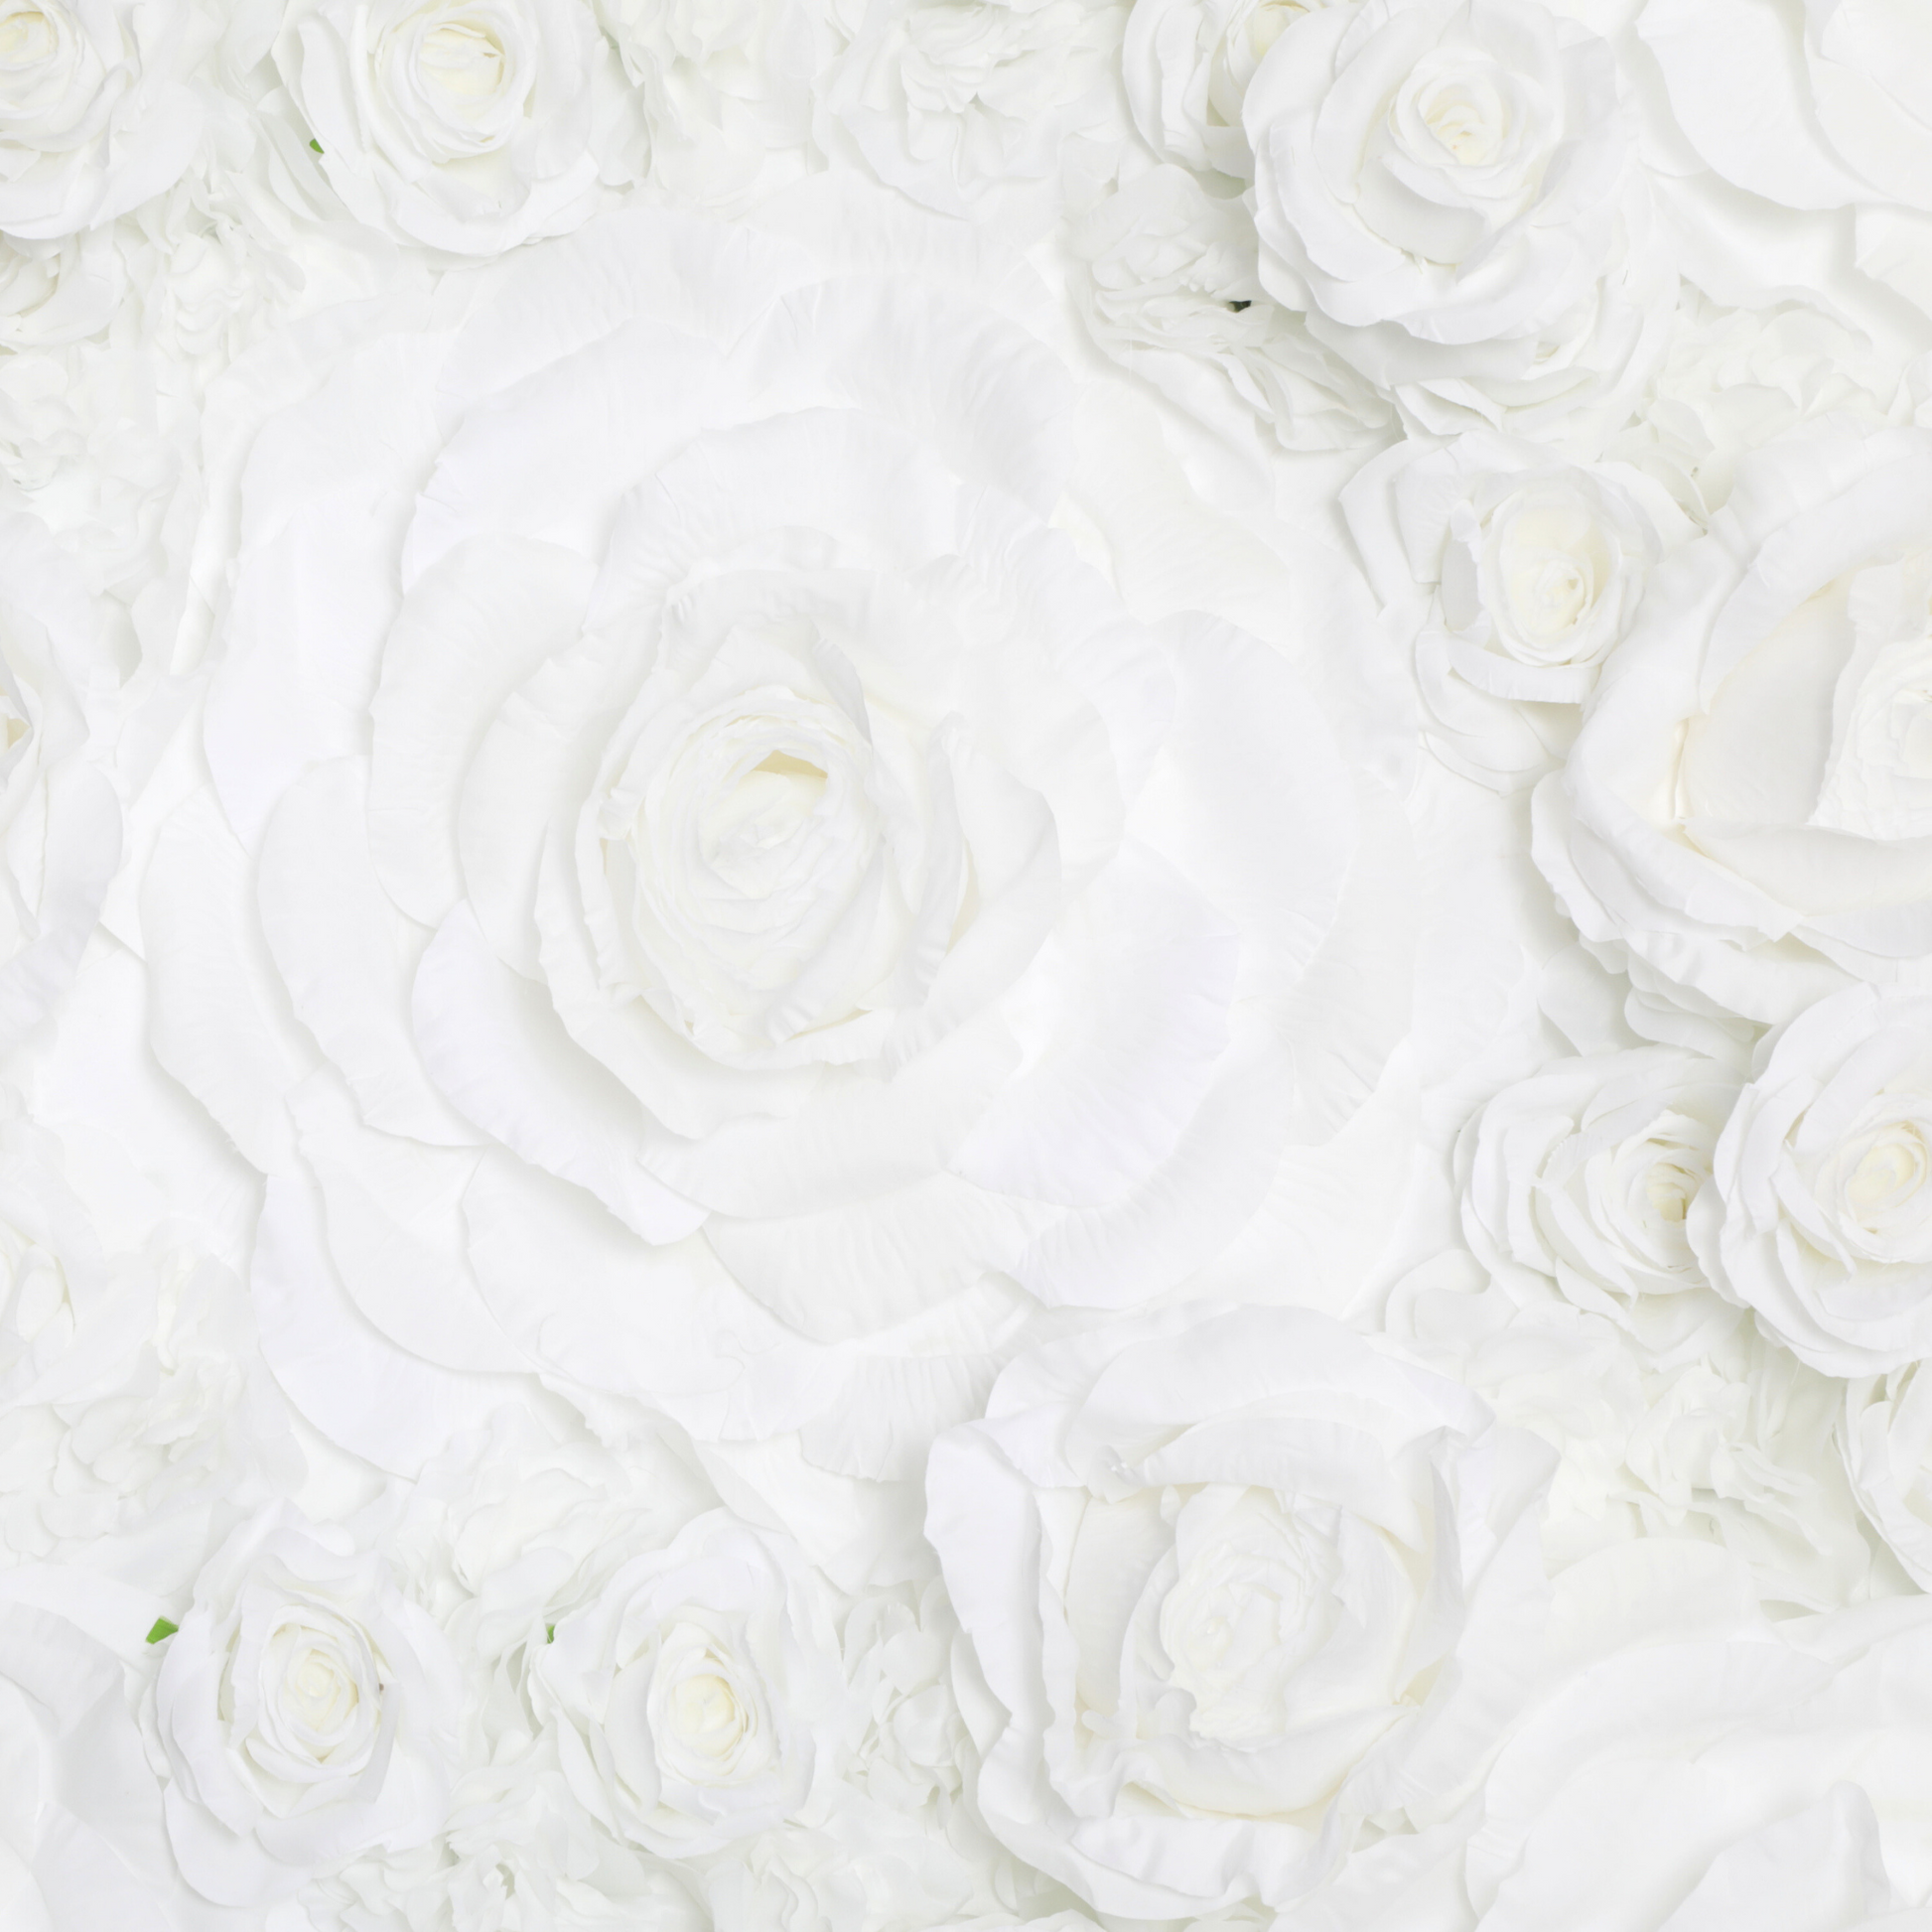 Luxe Roll Up Flower Wall Backdrop 8ft x 4ft - White